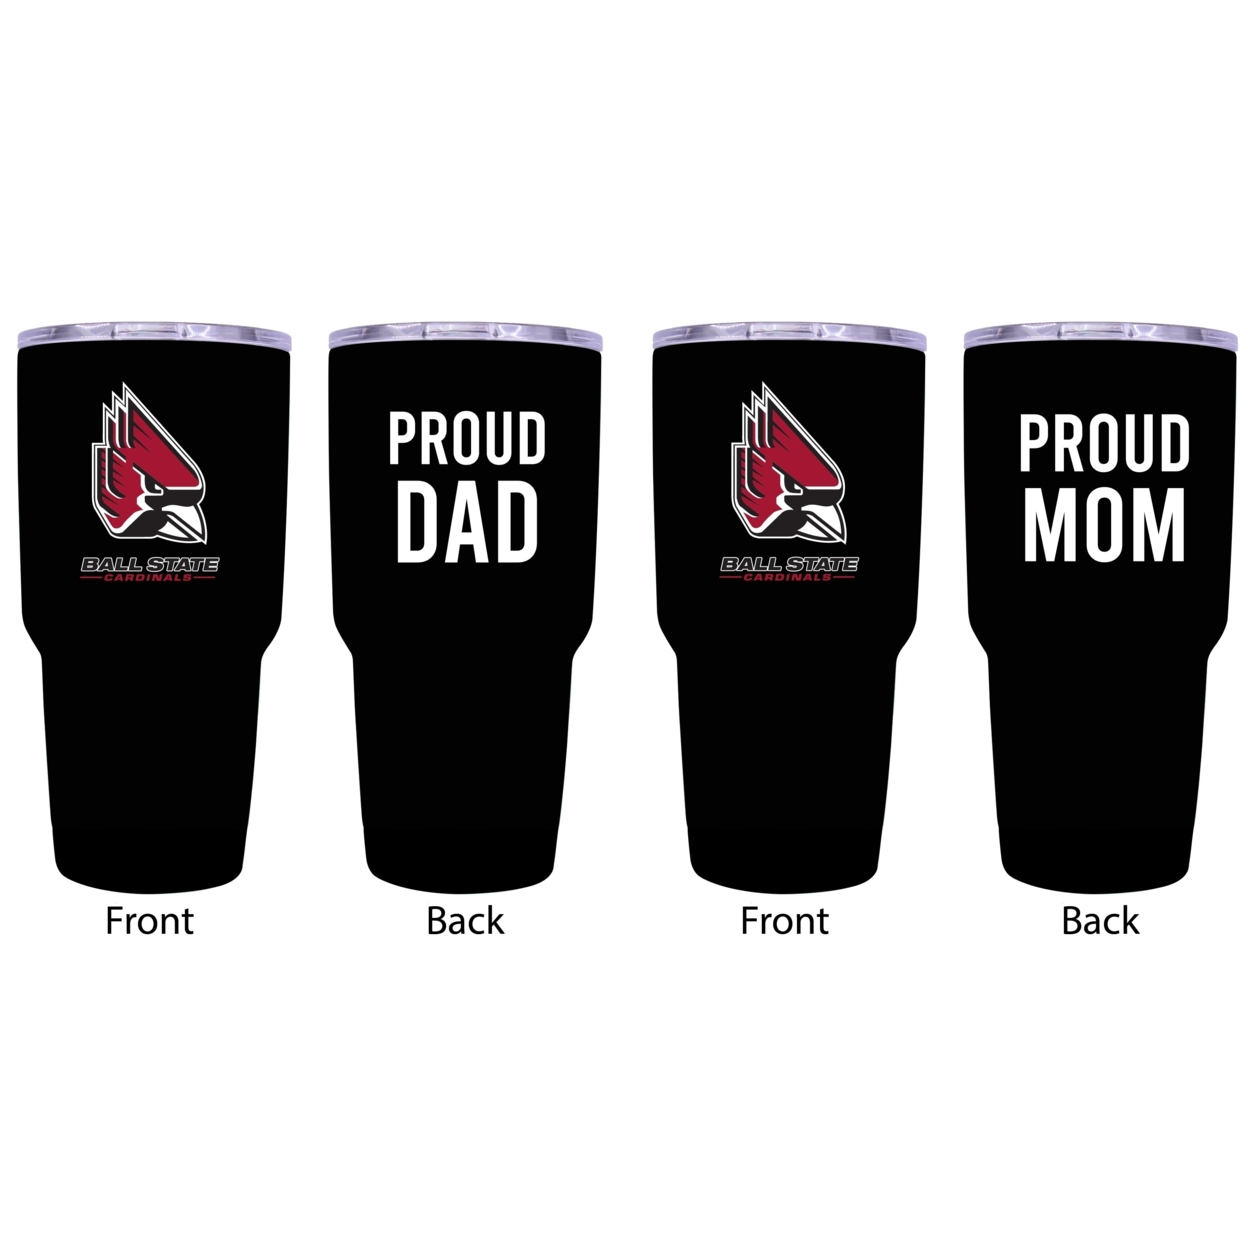 Ball State University Proud Mom And Dad 24 Oz Insulated Stainless Steel Tumblers 2 Pack Black.